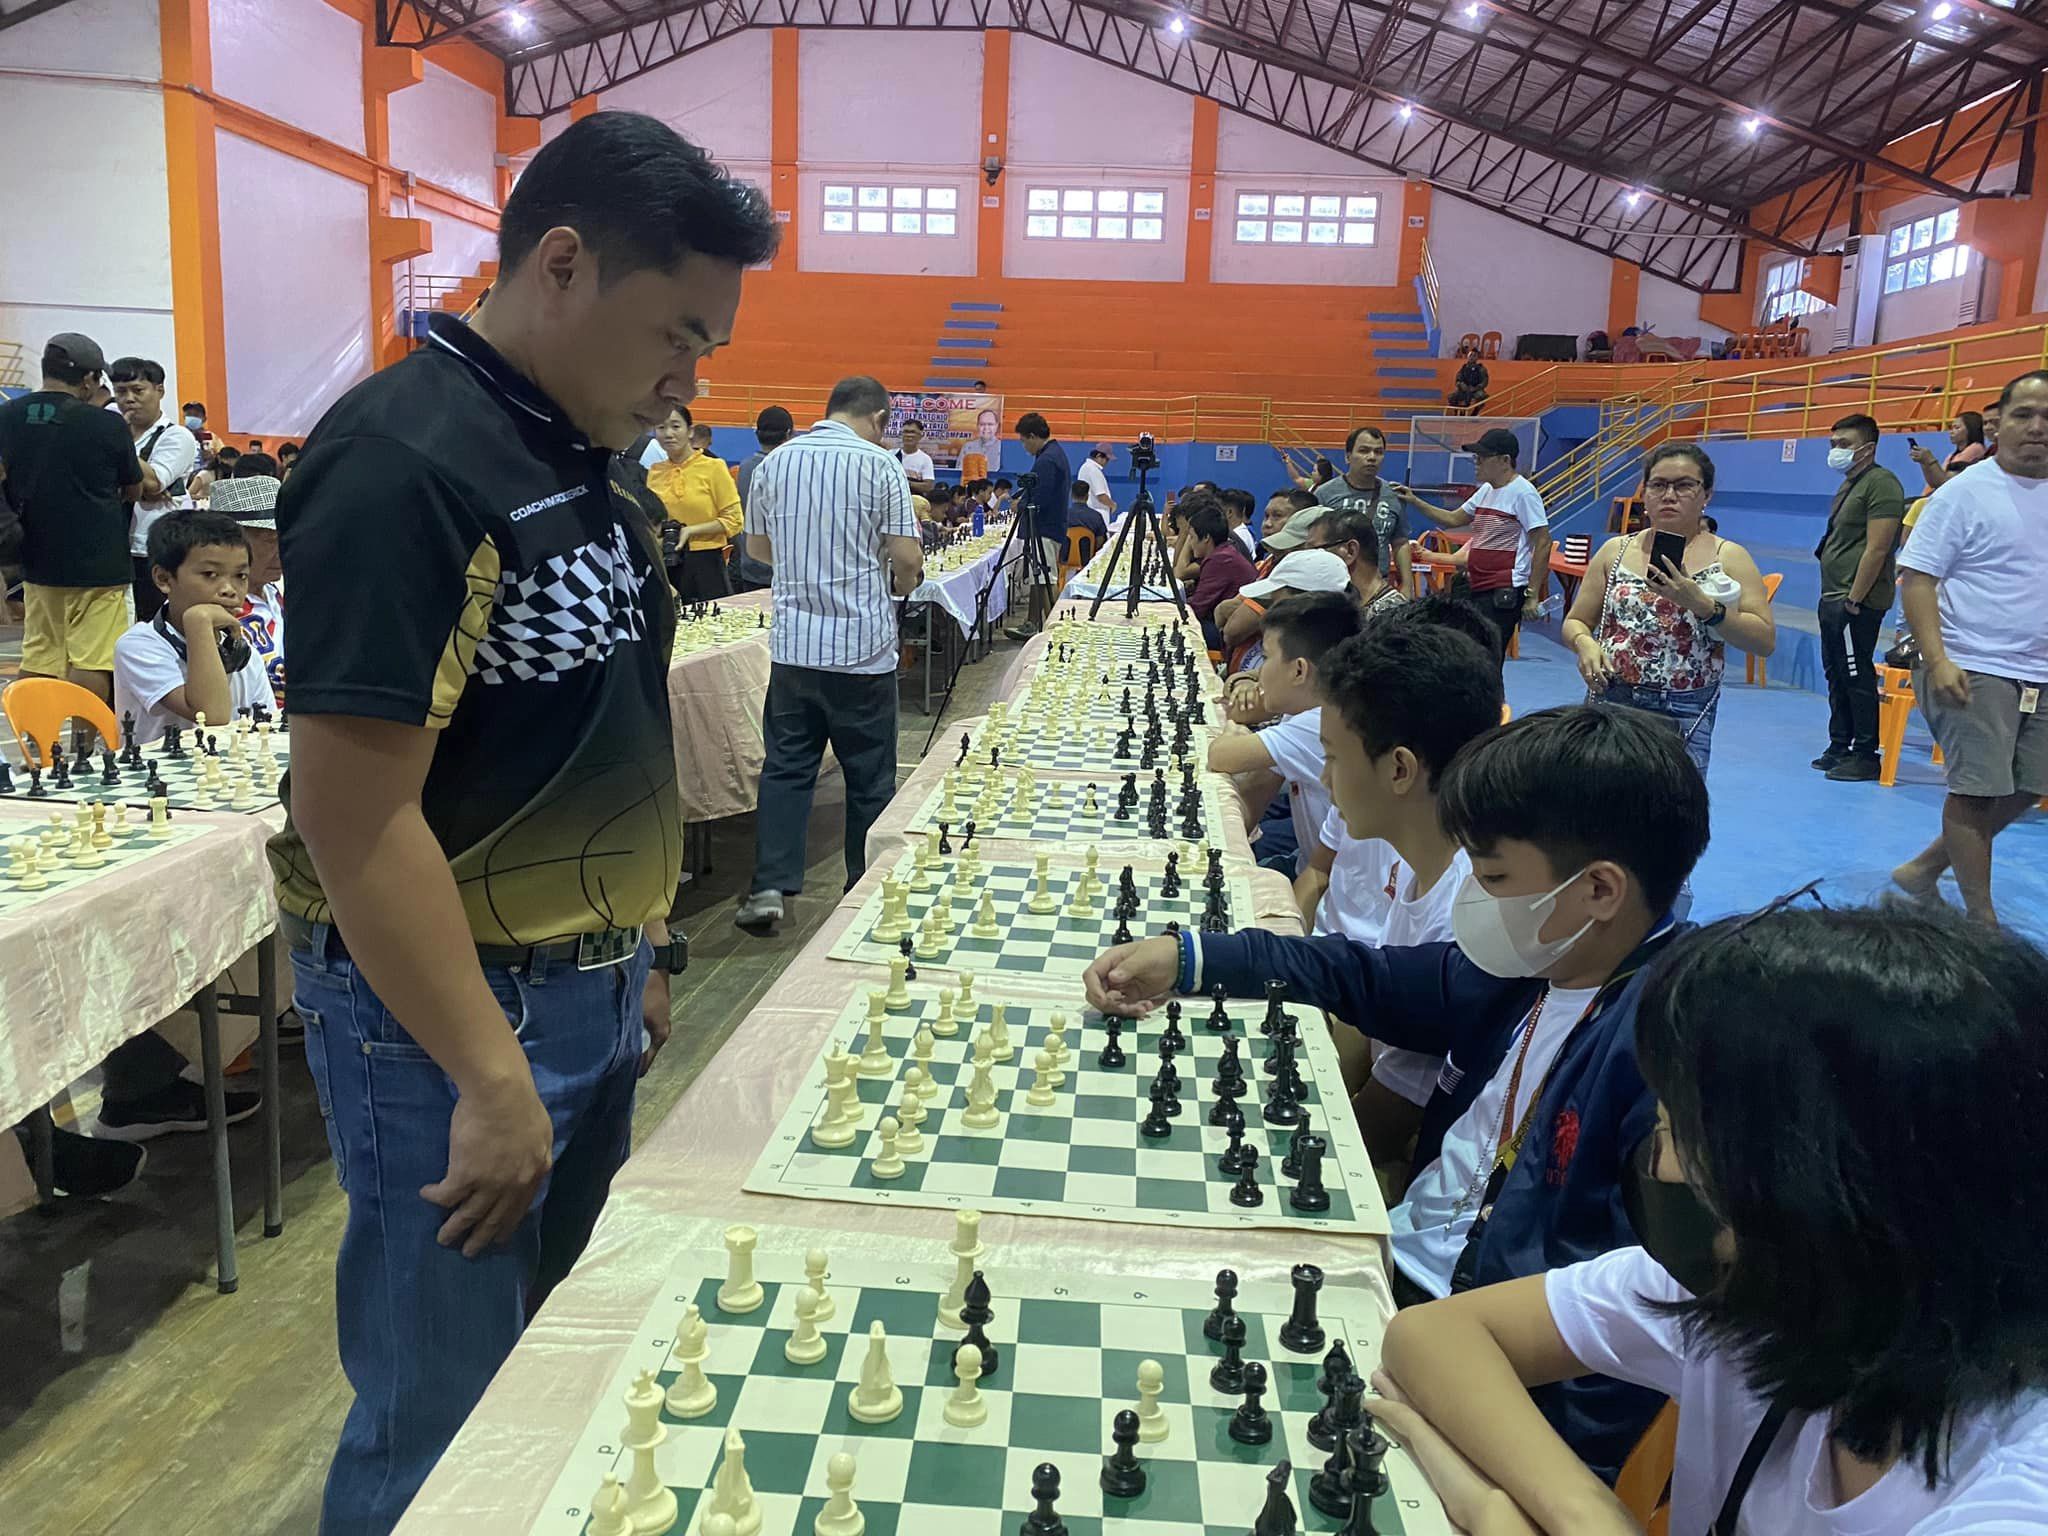 PIA - 350 chess players join in Asenso MisOcc nat'l open chess tournament